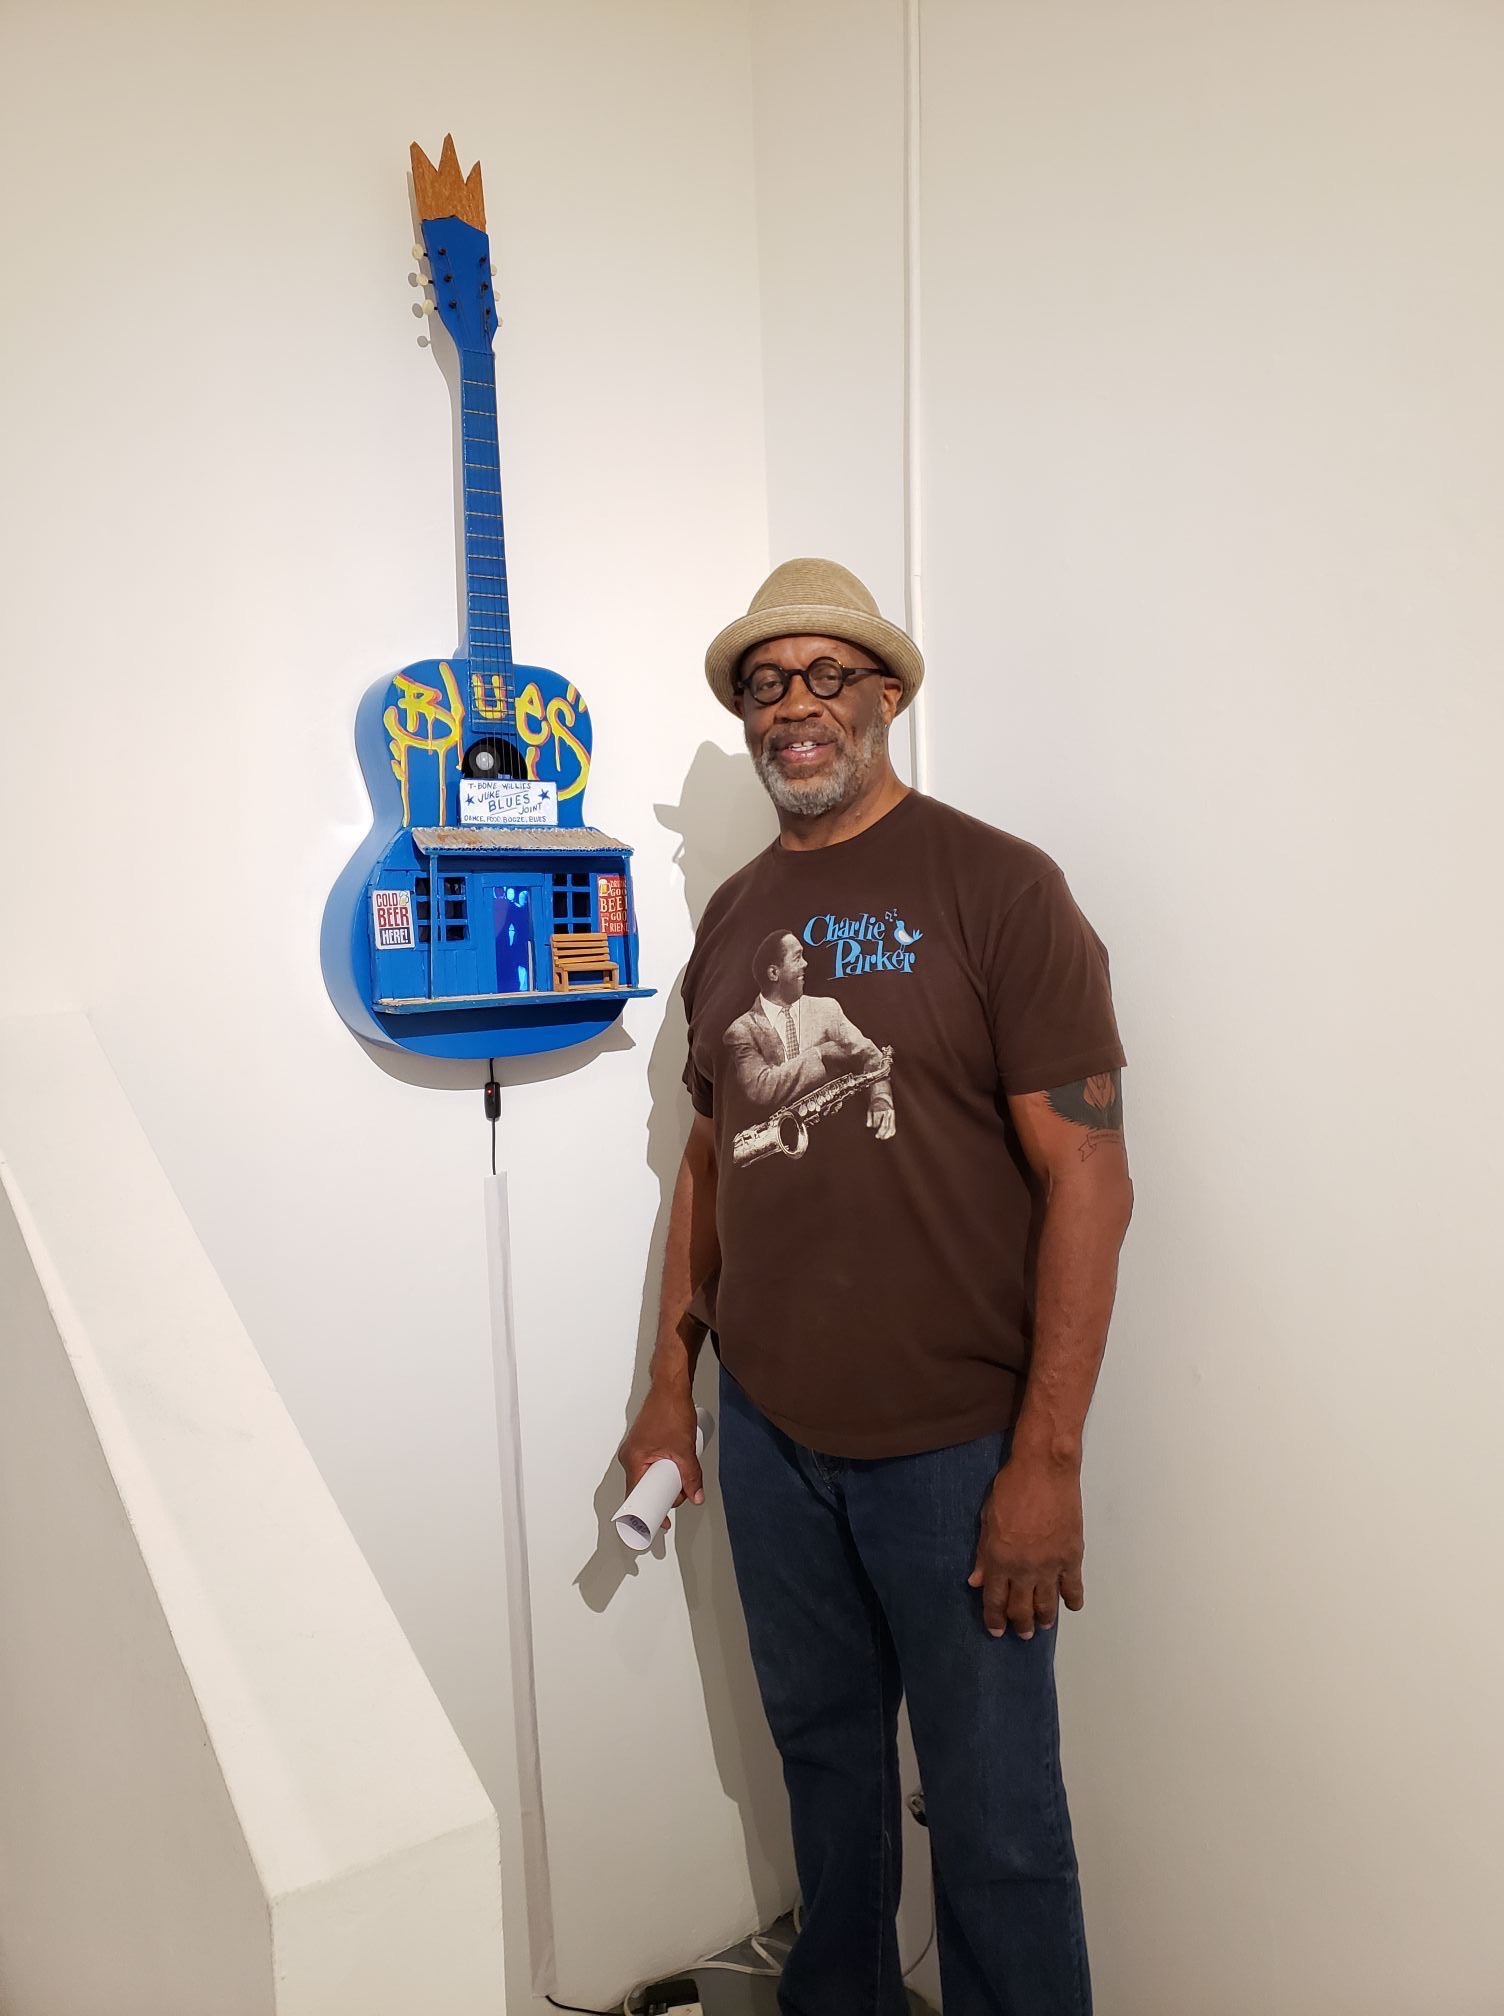 Metropolis Exhibition at Bruce Lurie Gallery, Curated by Badir McCleary. 2019. Photo by Badir McCleary